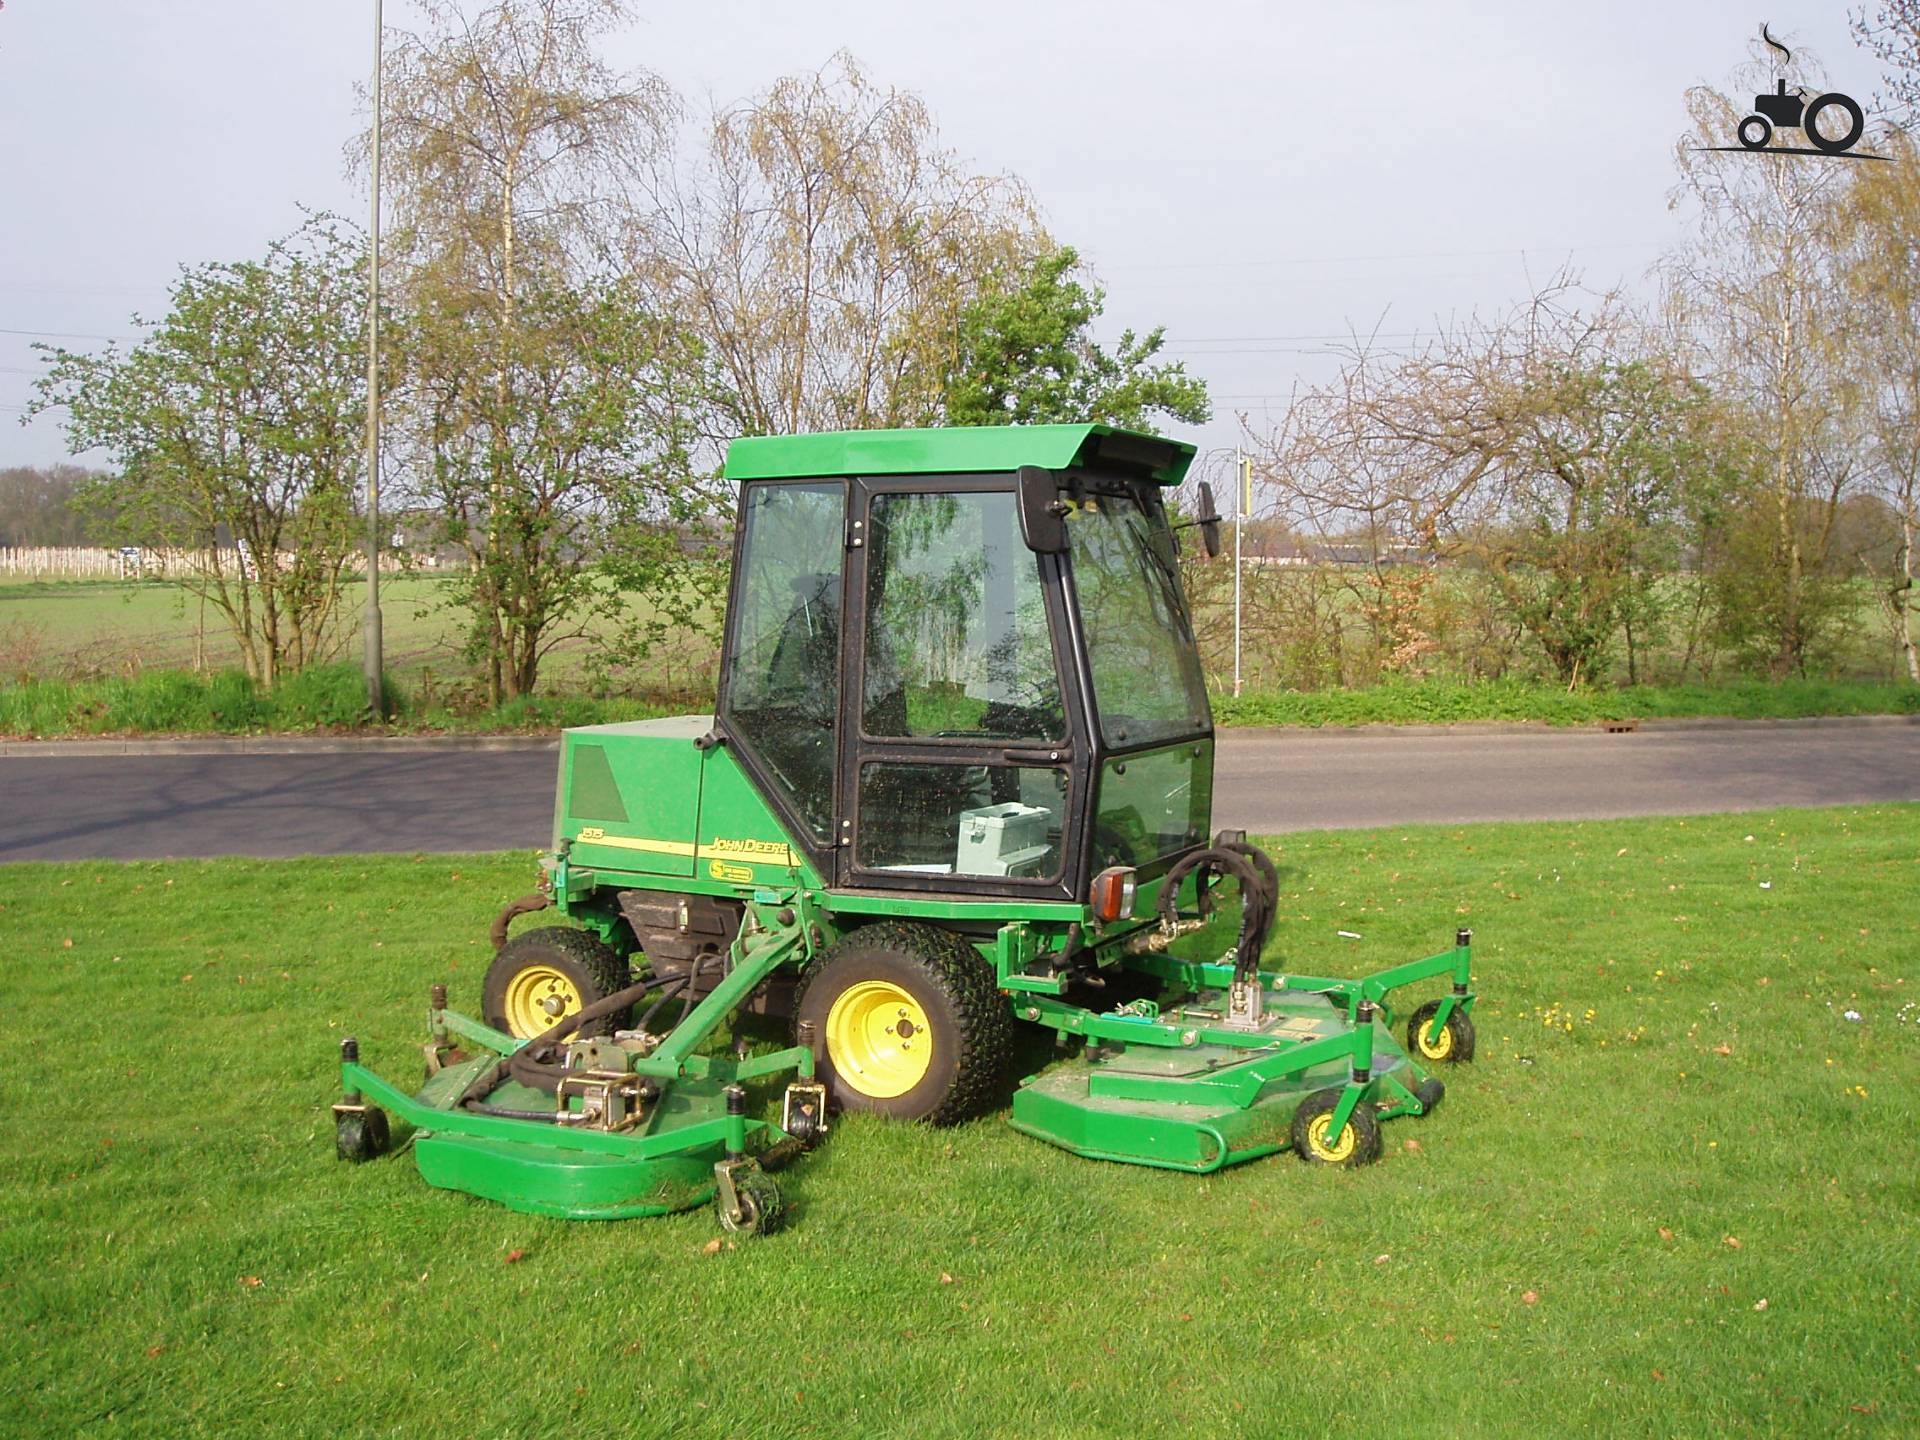 John Deere 1515 Specs and data - Everything about the John ...